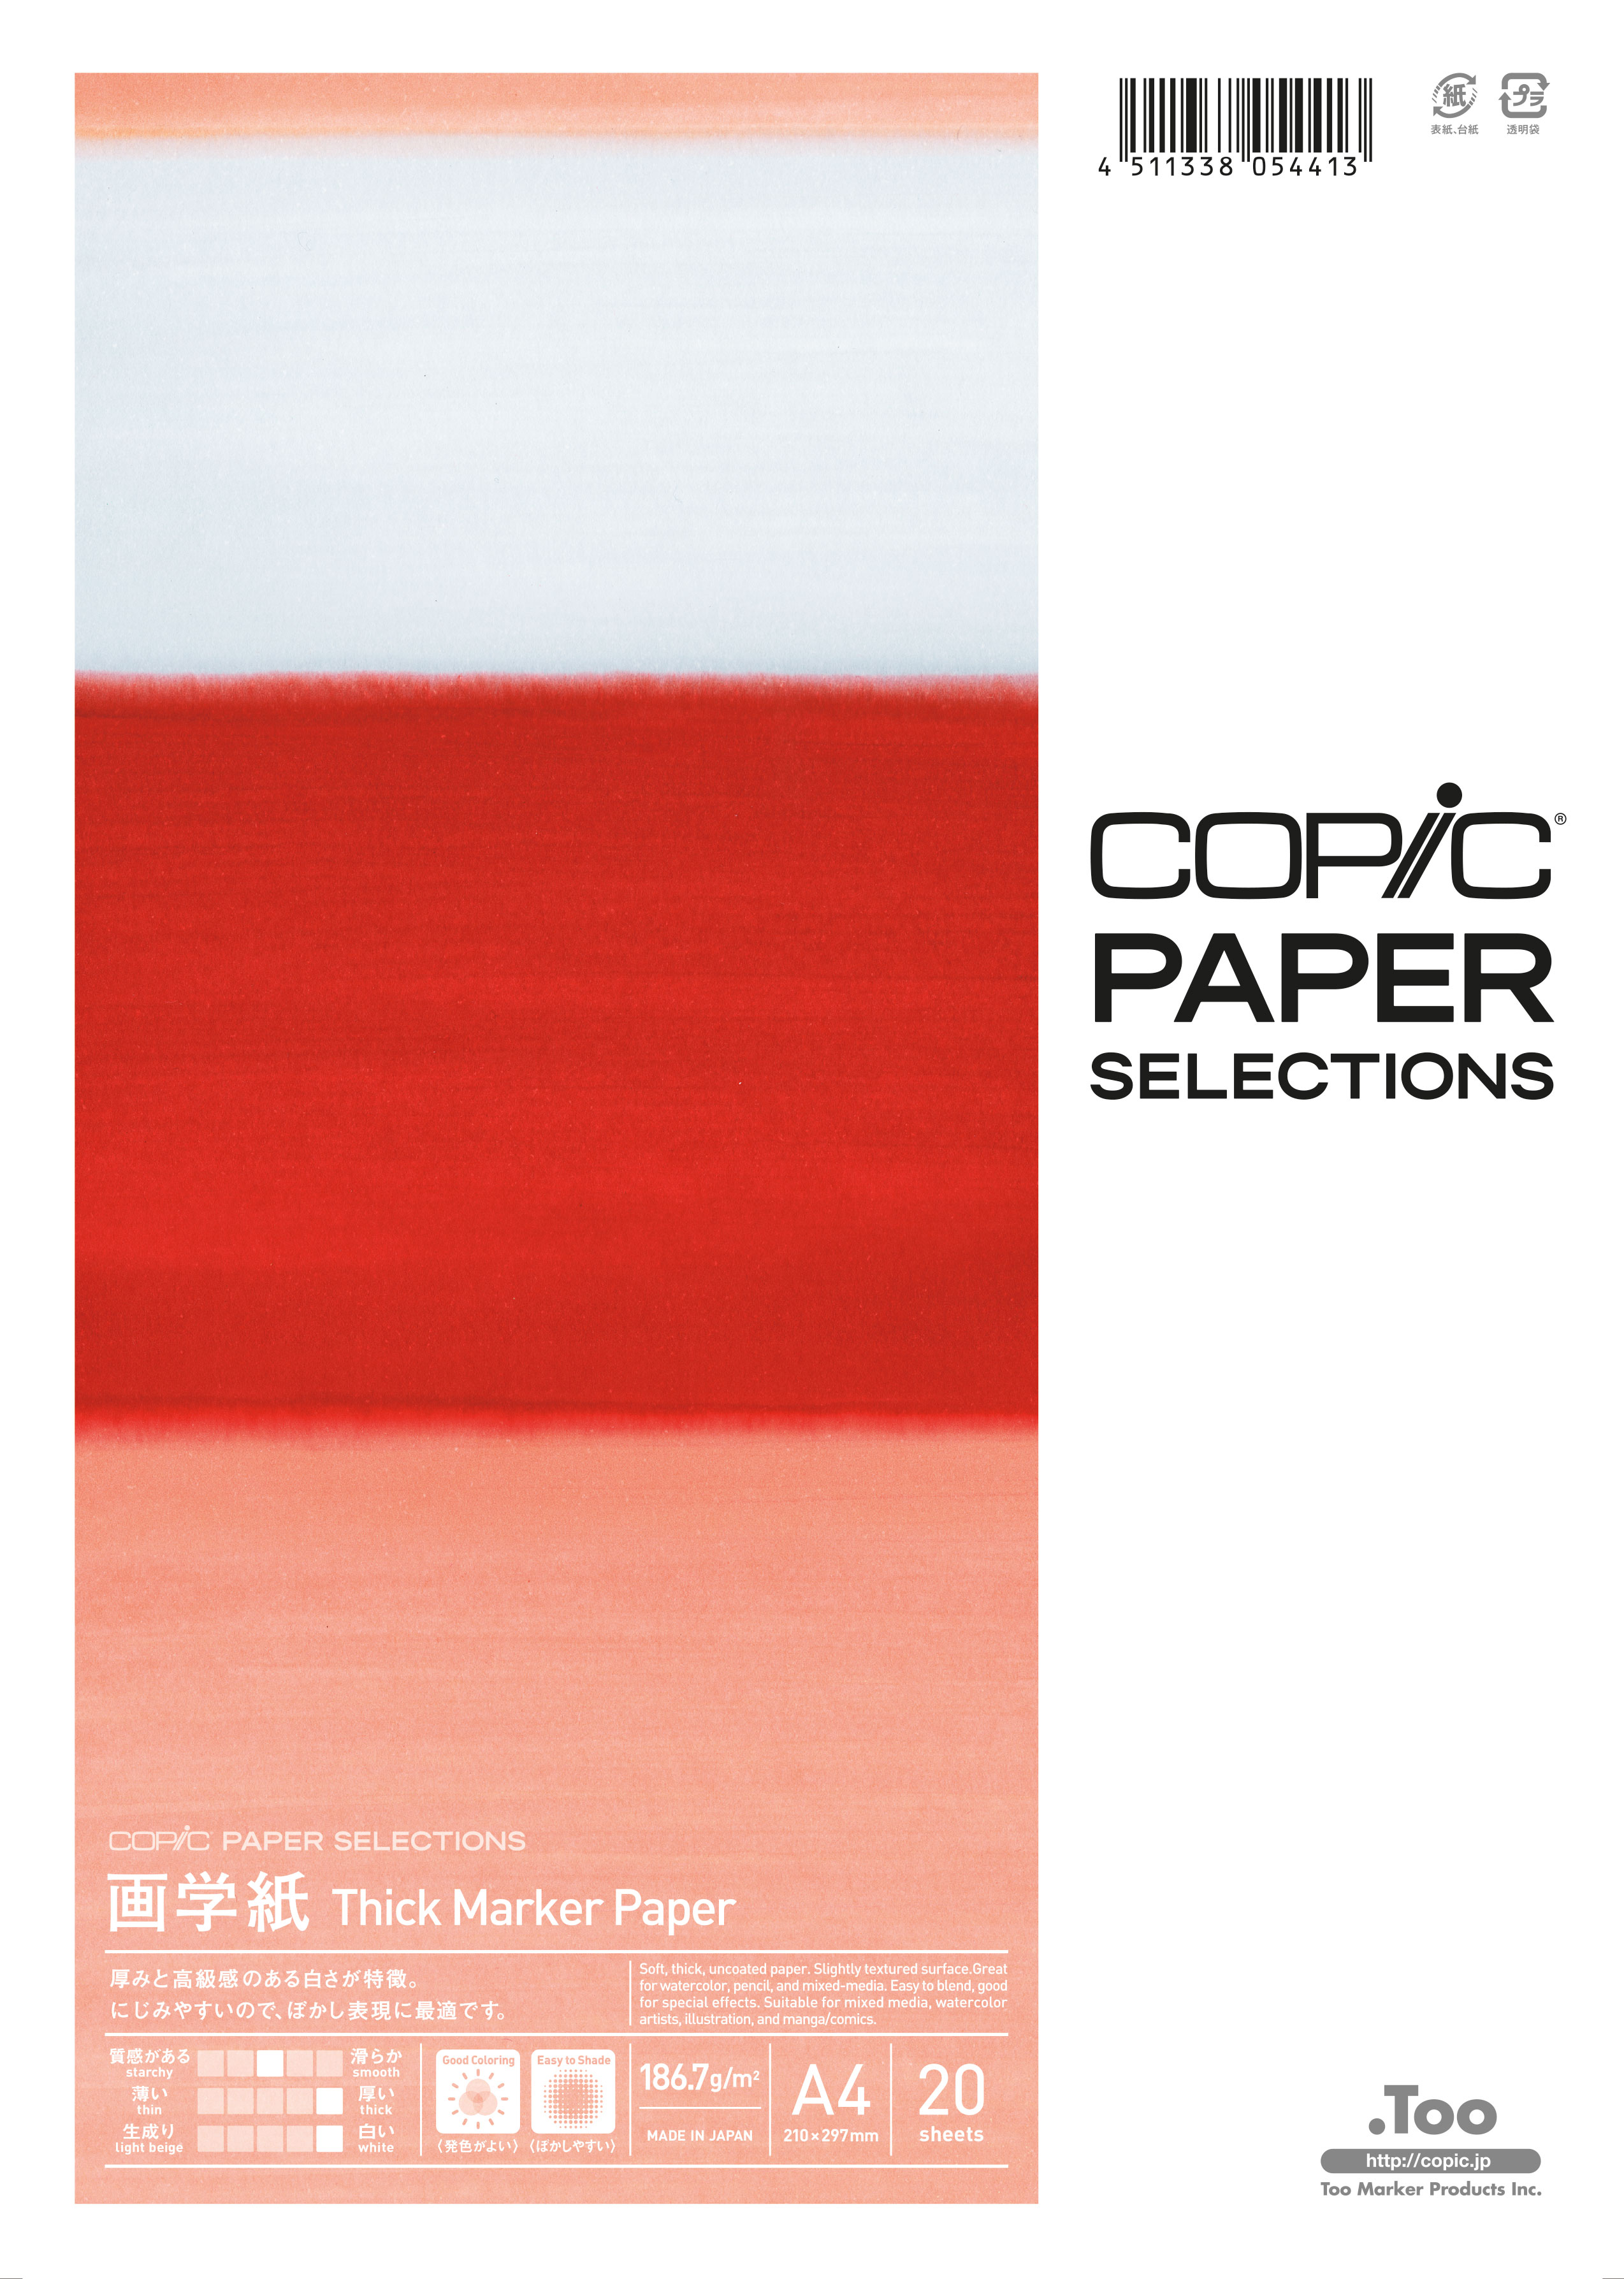 Copic Paper Selections Thick Marker Paper A4 20 Blatt 186g/m² hellweiß